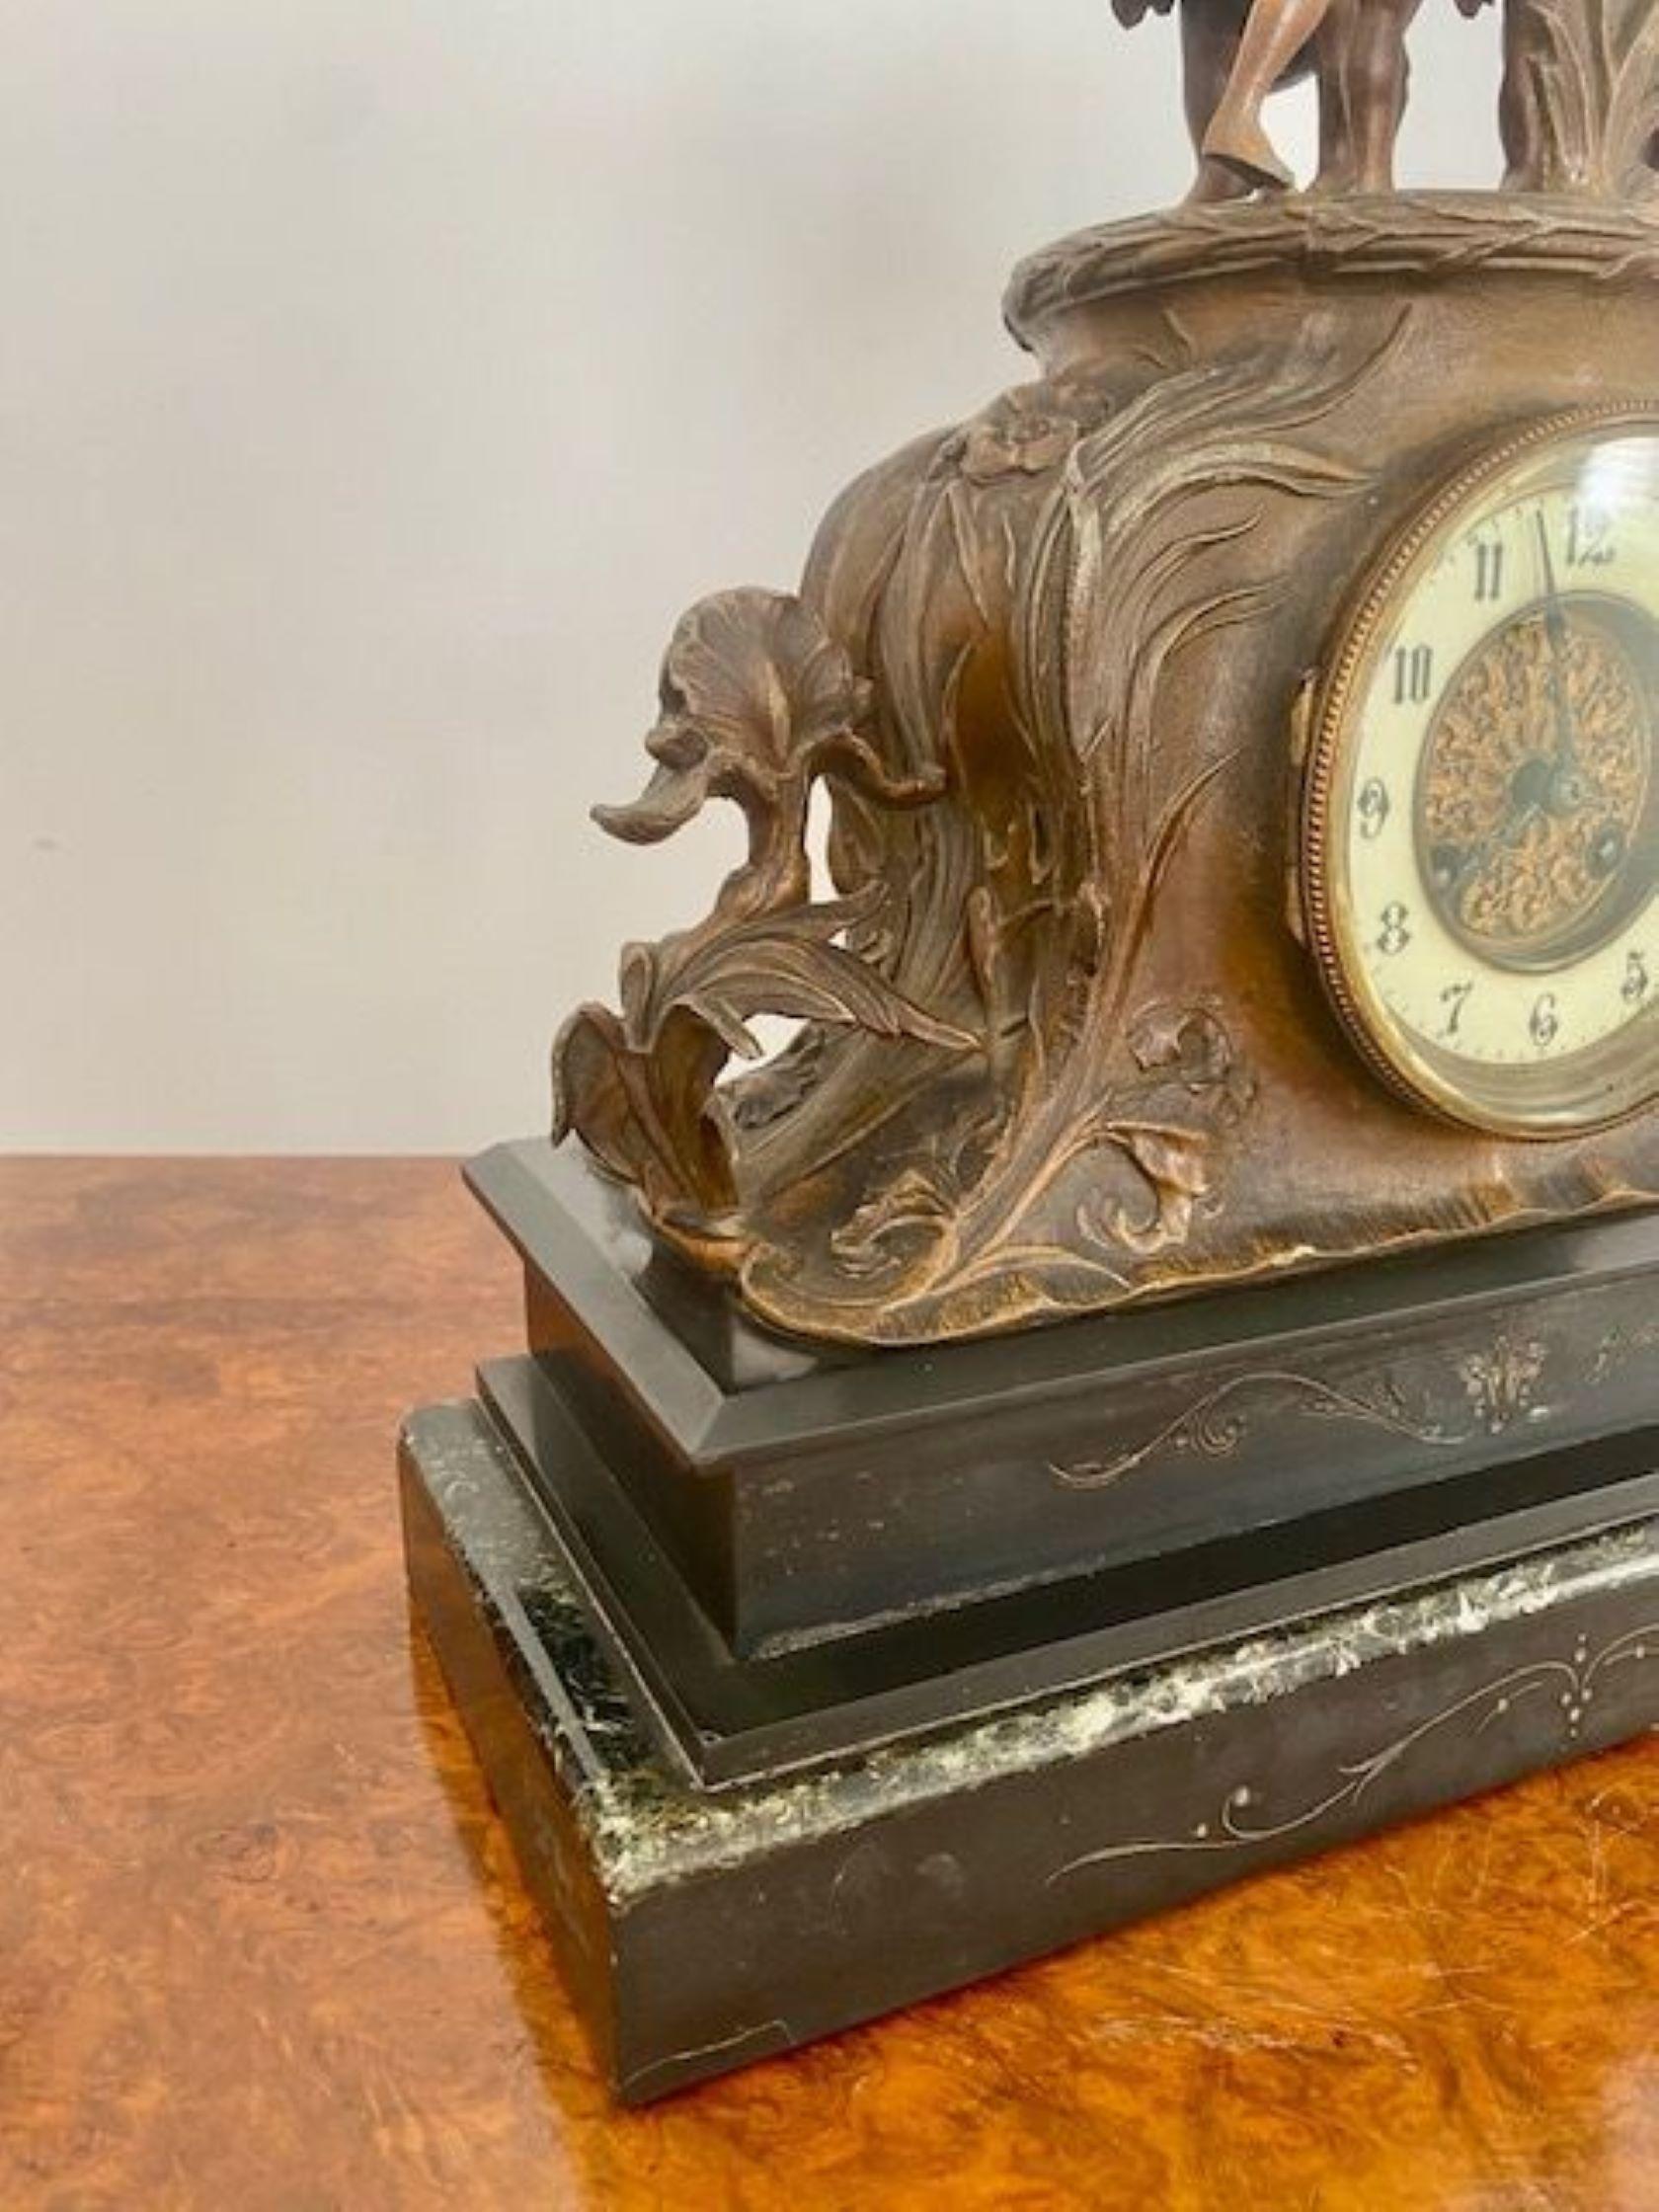 Large antique Victorian marble mantle clock having Marley horses to the top in shelter, circular clock with a porcelain dial and original hands, 8 day movement striking the hour and half hour on a gong standing on a marble base
Please note all of